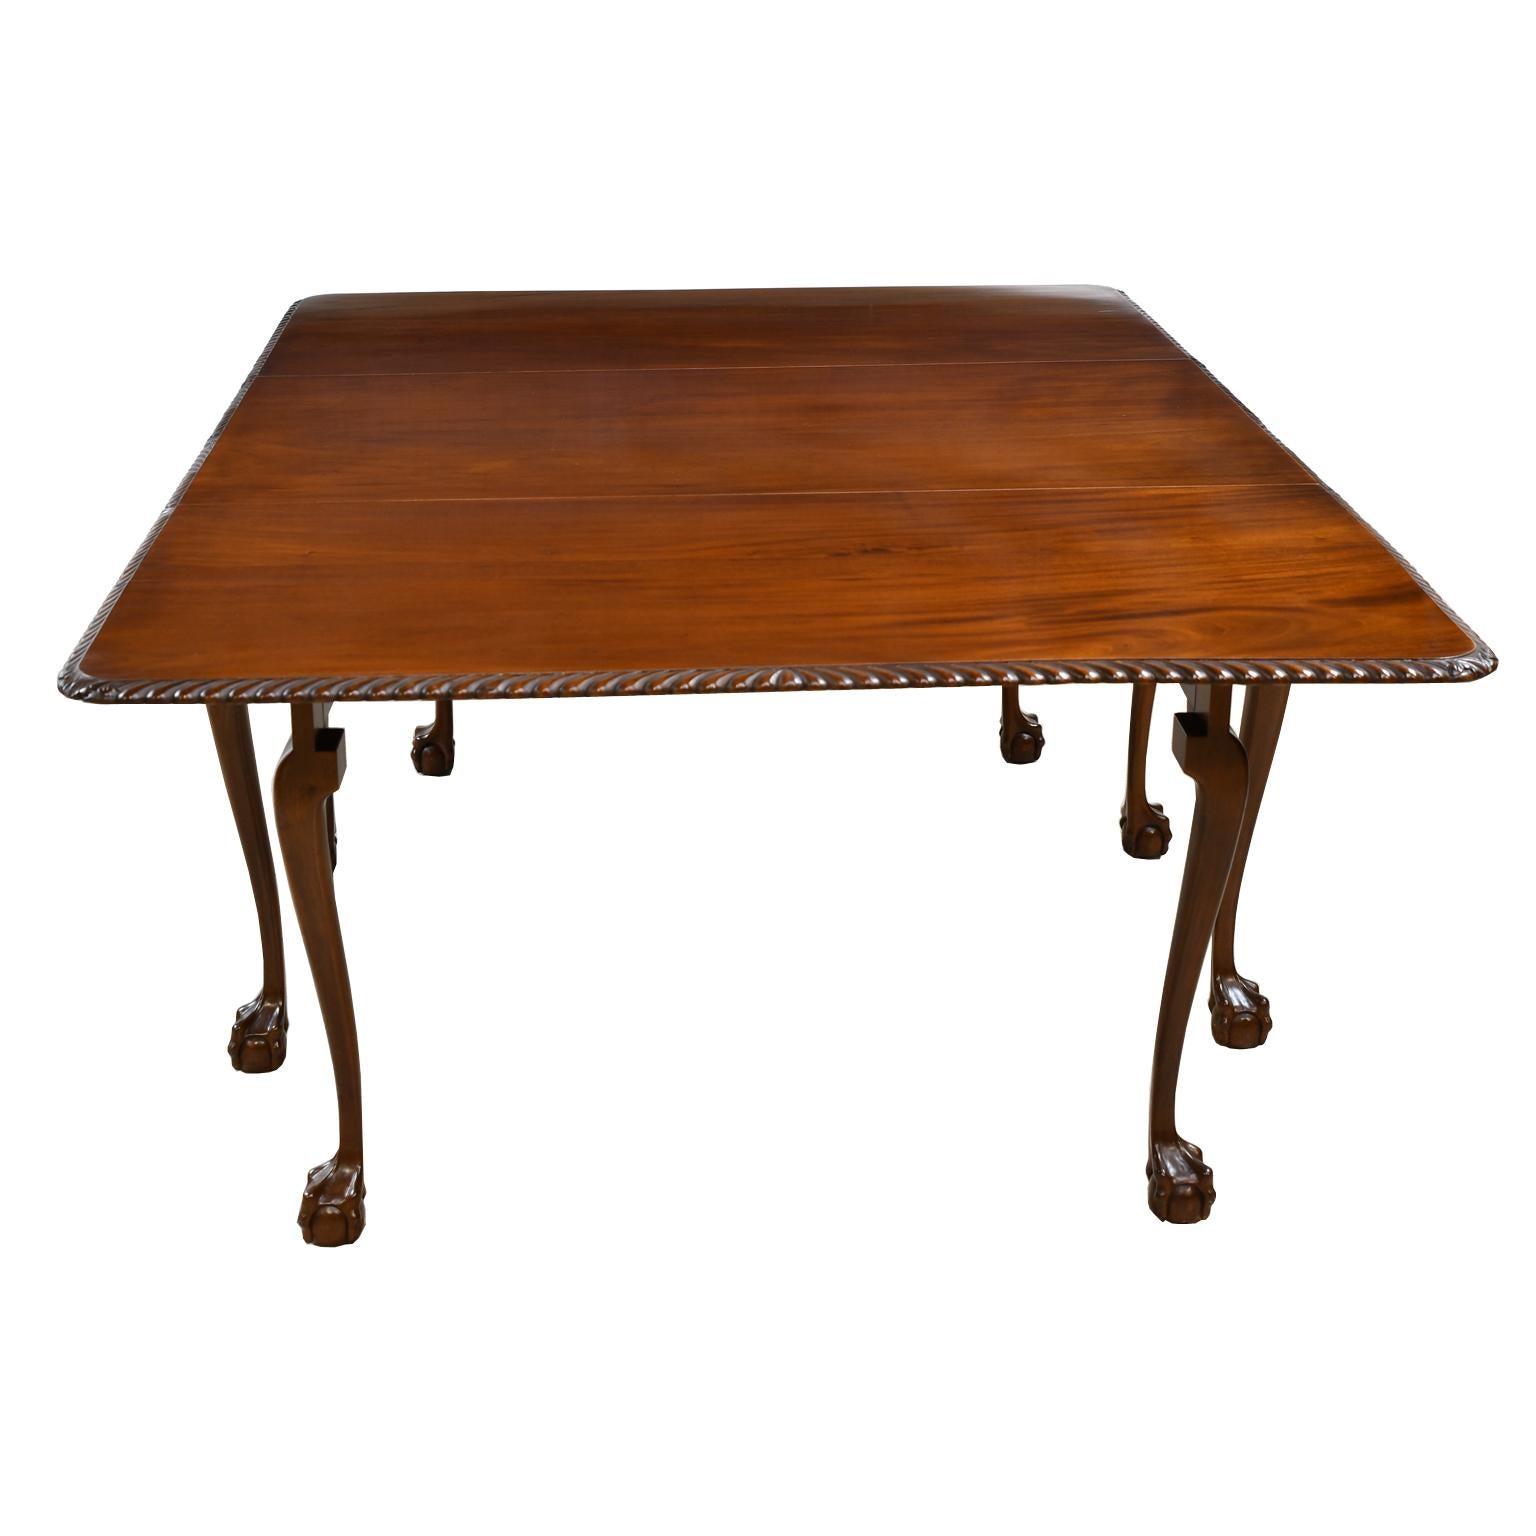 Large Centennial Queen Anne-Style Drop-Leaf Dining Table Philadelphia circa 1880 In Good Condition For Sale In Miami, FL